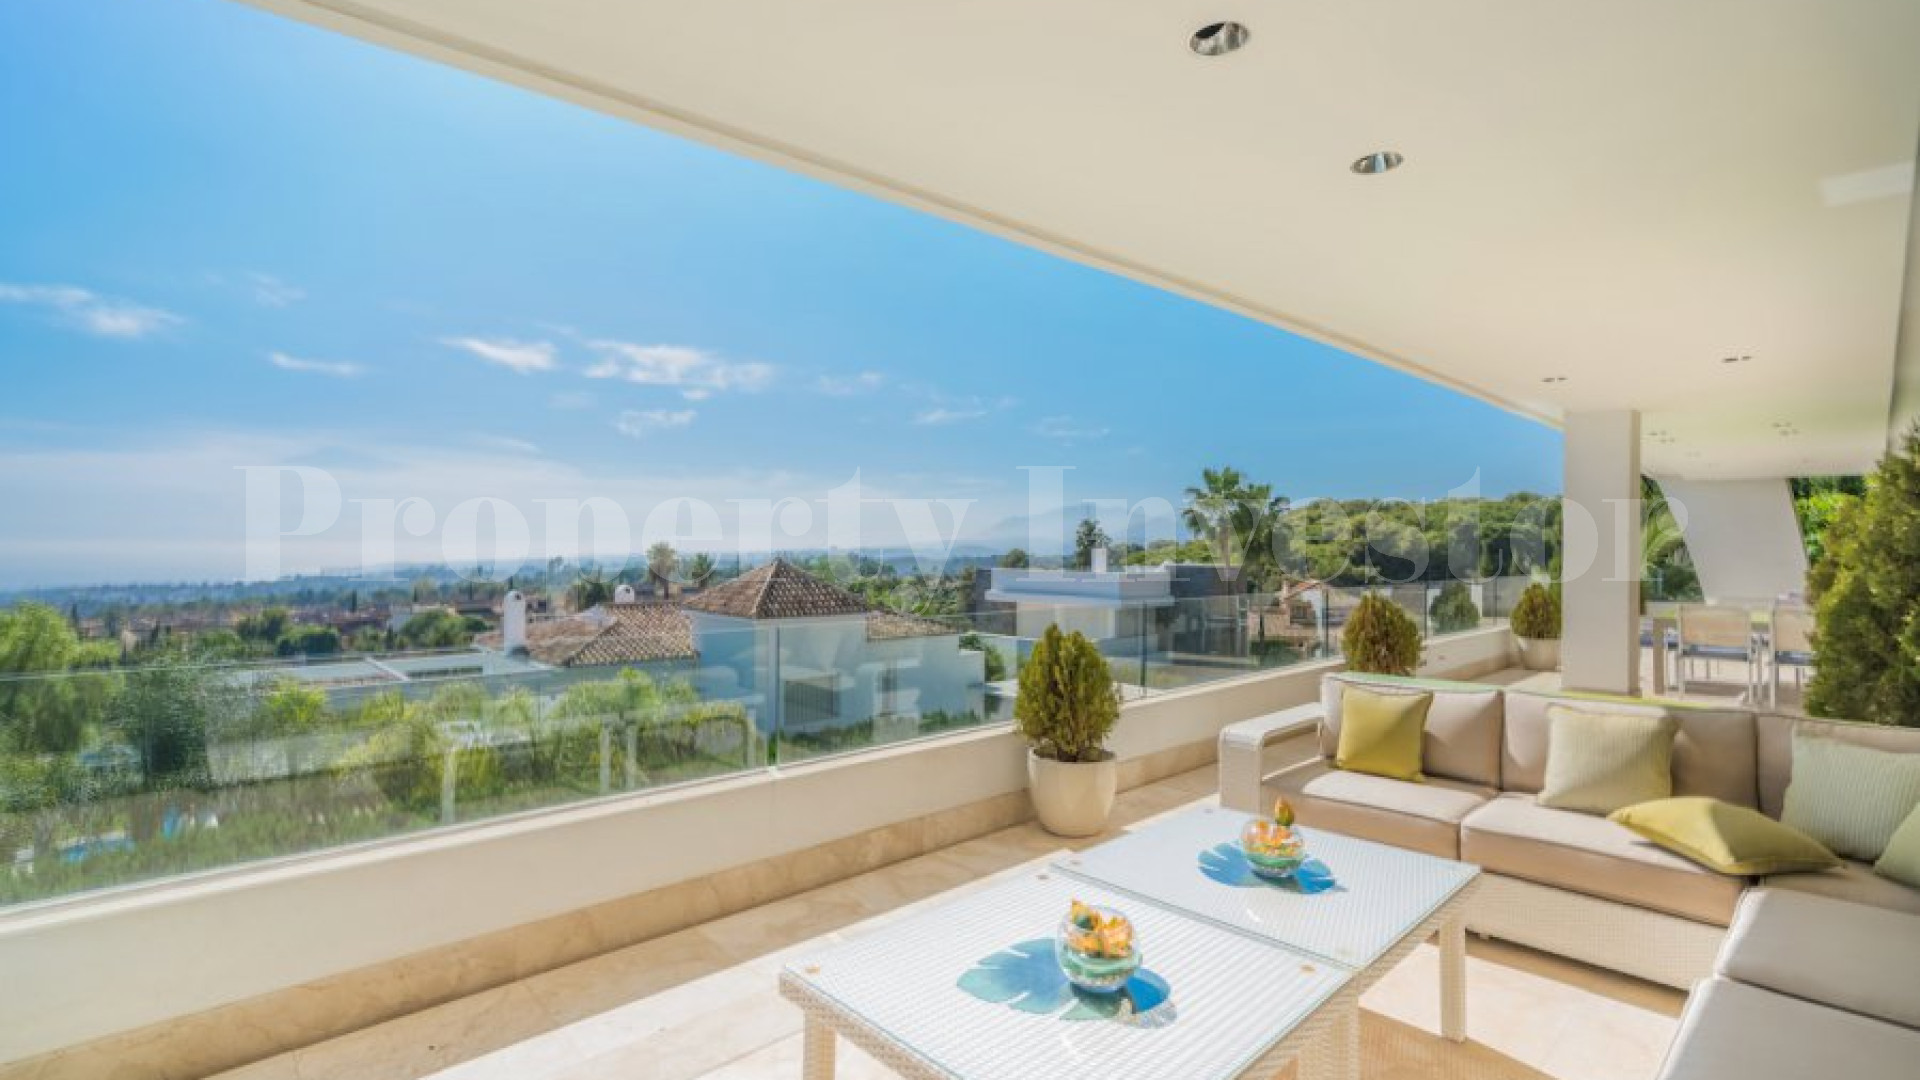 Fabulous 5 Bedroom Duplex Penthouse with Panoramic Sea Views for Sale in Marbella